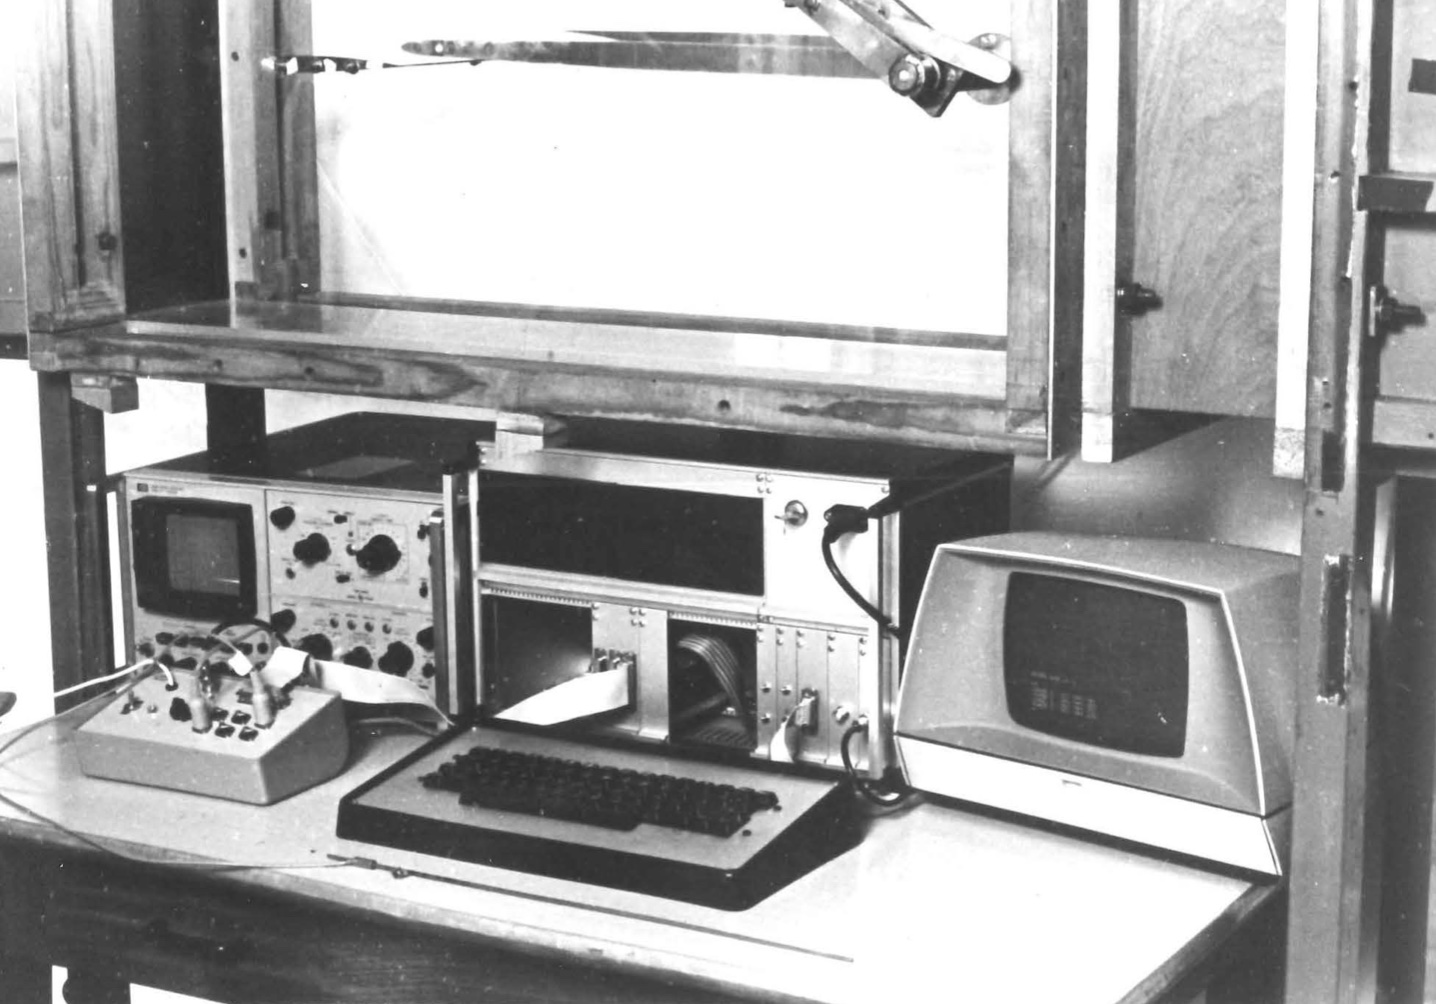 Steve’s home-built computer, the 2-level rack behind the keyboard, was used to log data in the Whittle laboratory and subsequently write his thesis. It became a test-bed for some of the key concepts behind the BBC Micro. Picture reproduced from PhD thesis with permission. (Furber 1980)